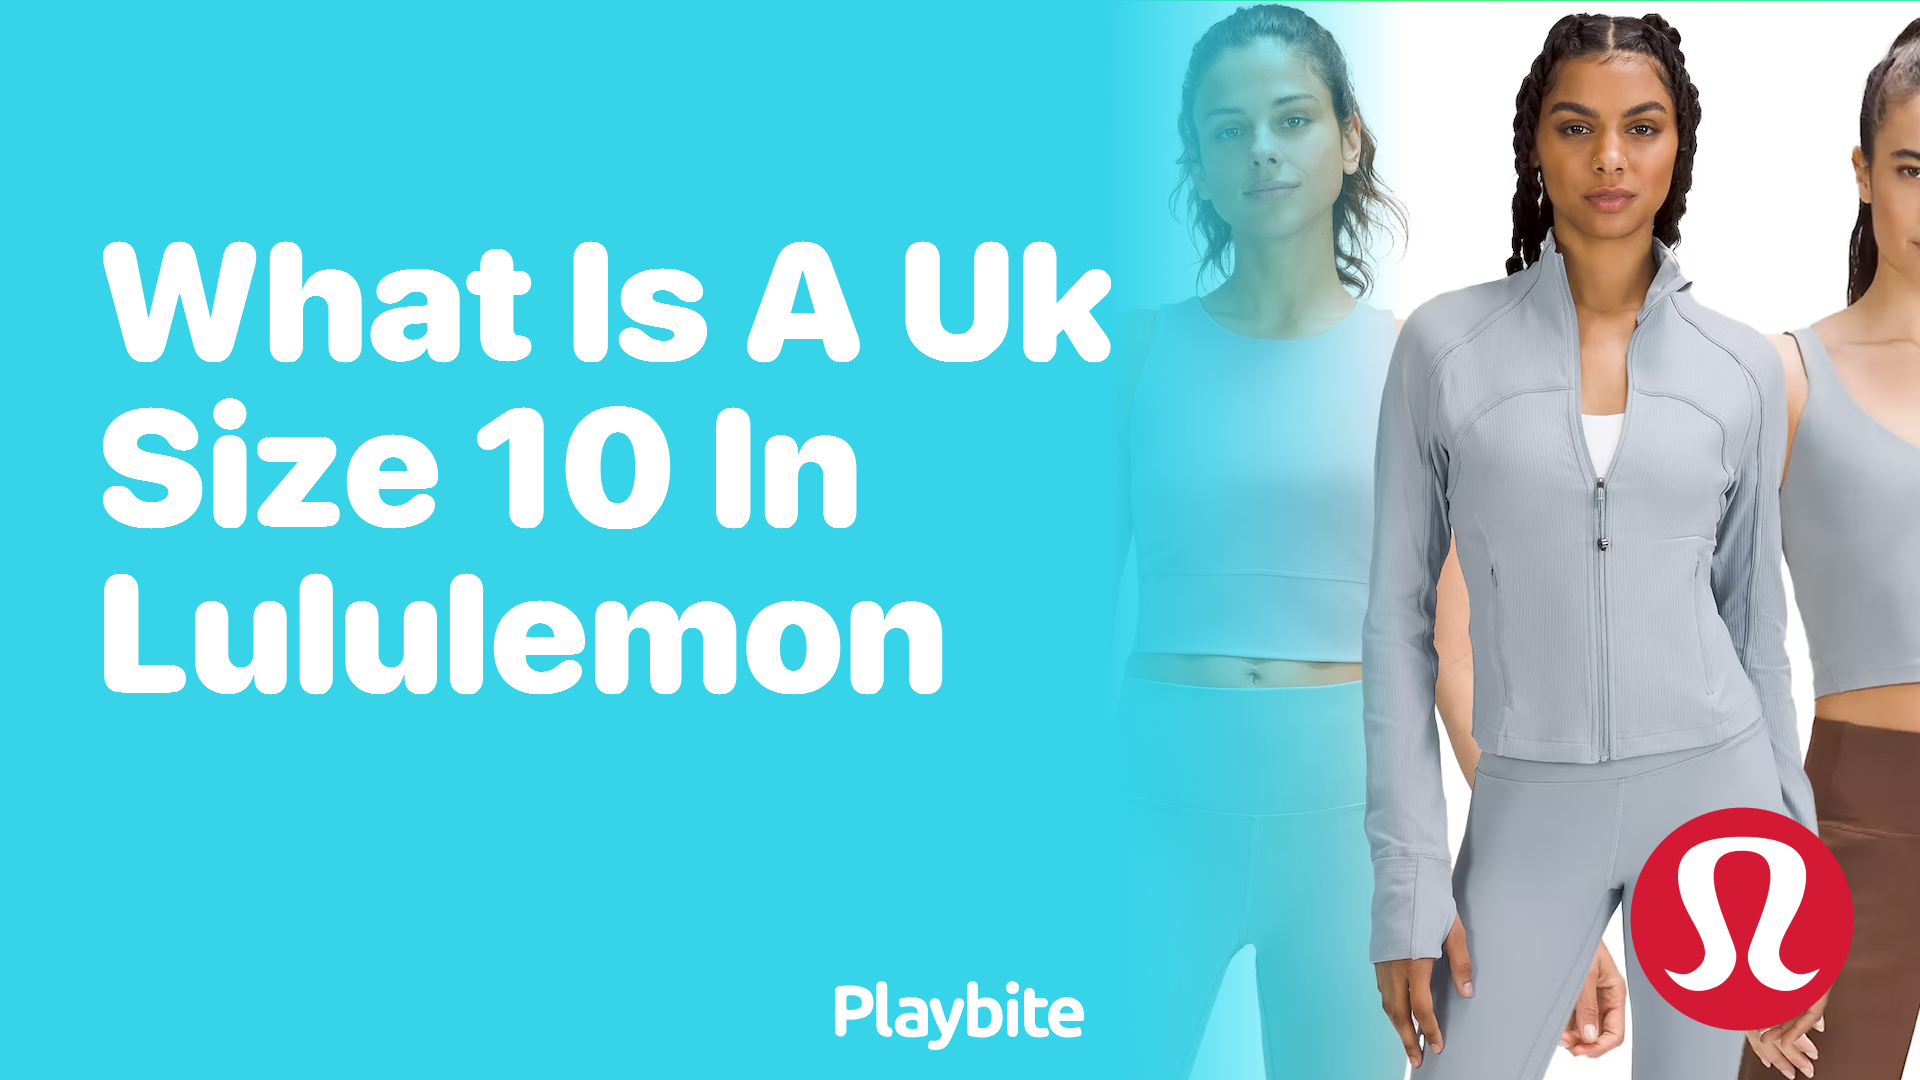 What Is a UK Size 10 in Lululemon? - Playbite